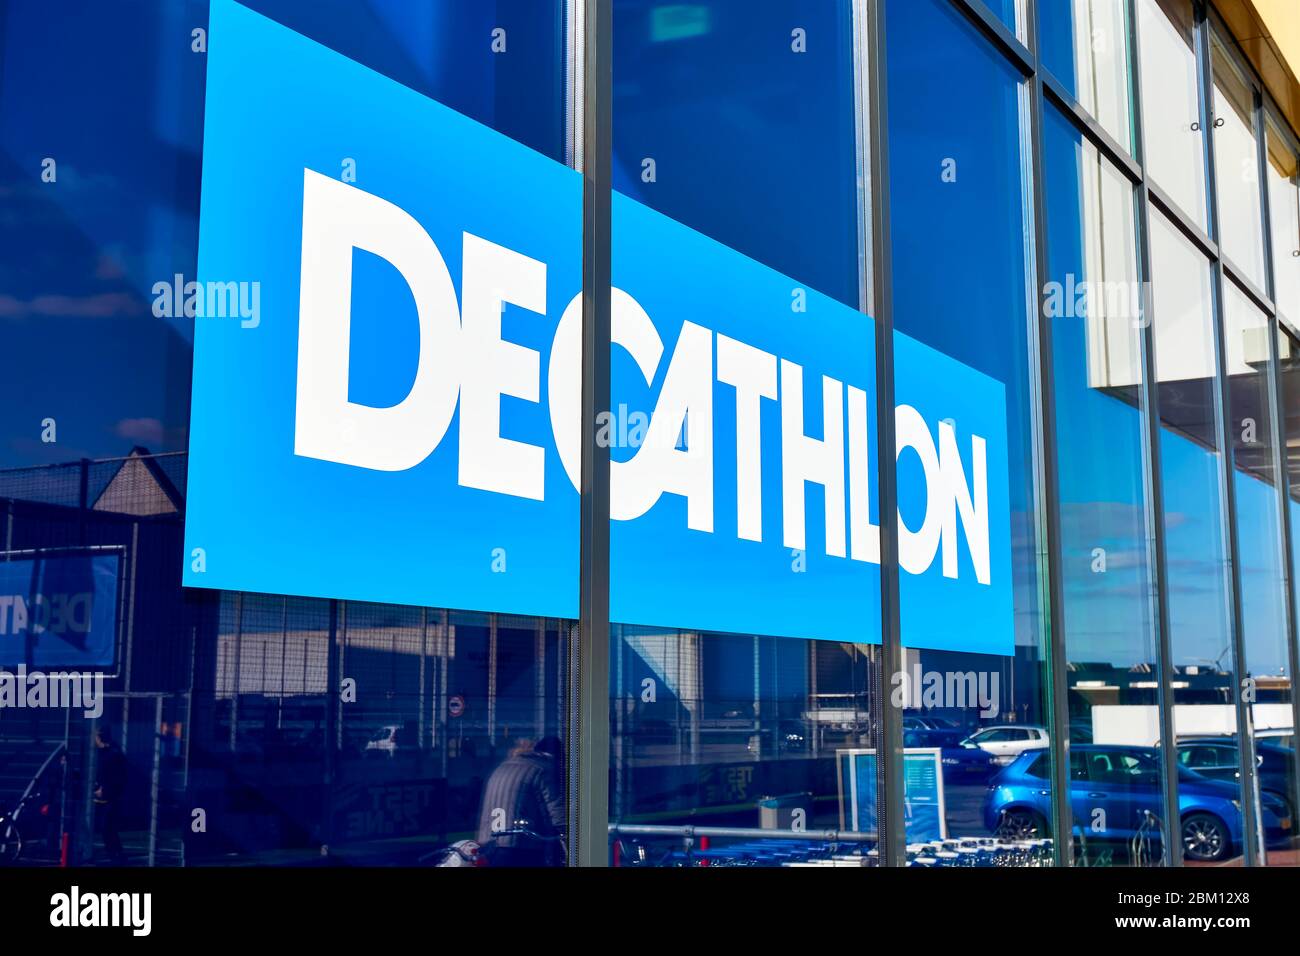 Leeuwarden, The Netherlands March 21, 2020 - Decathlon sign on a store wall. Decathlon is a French company and a large sporting goods retailer. Stock Photo